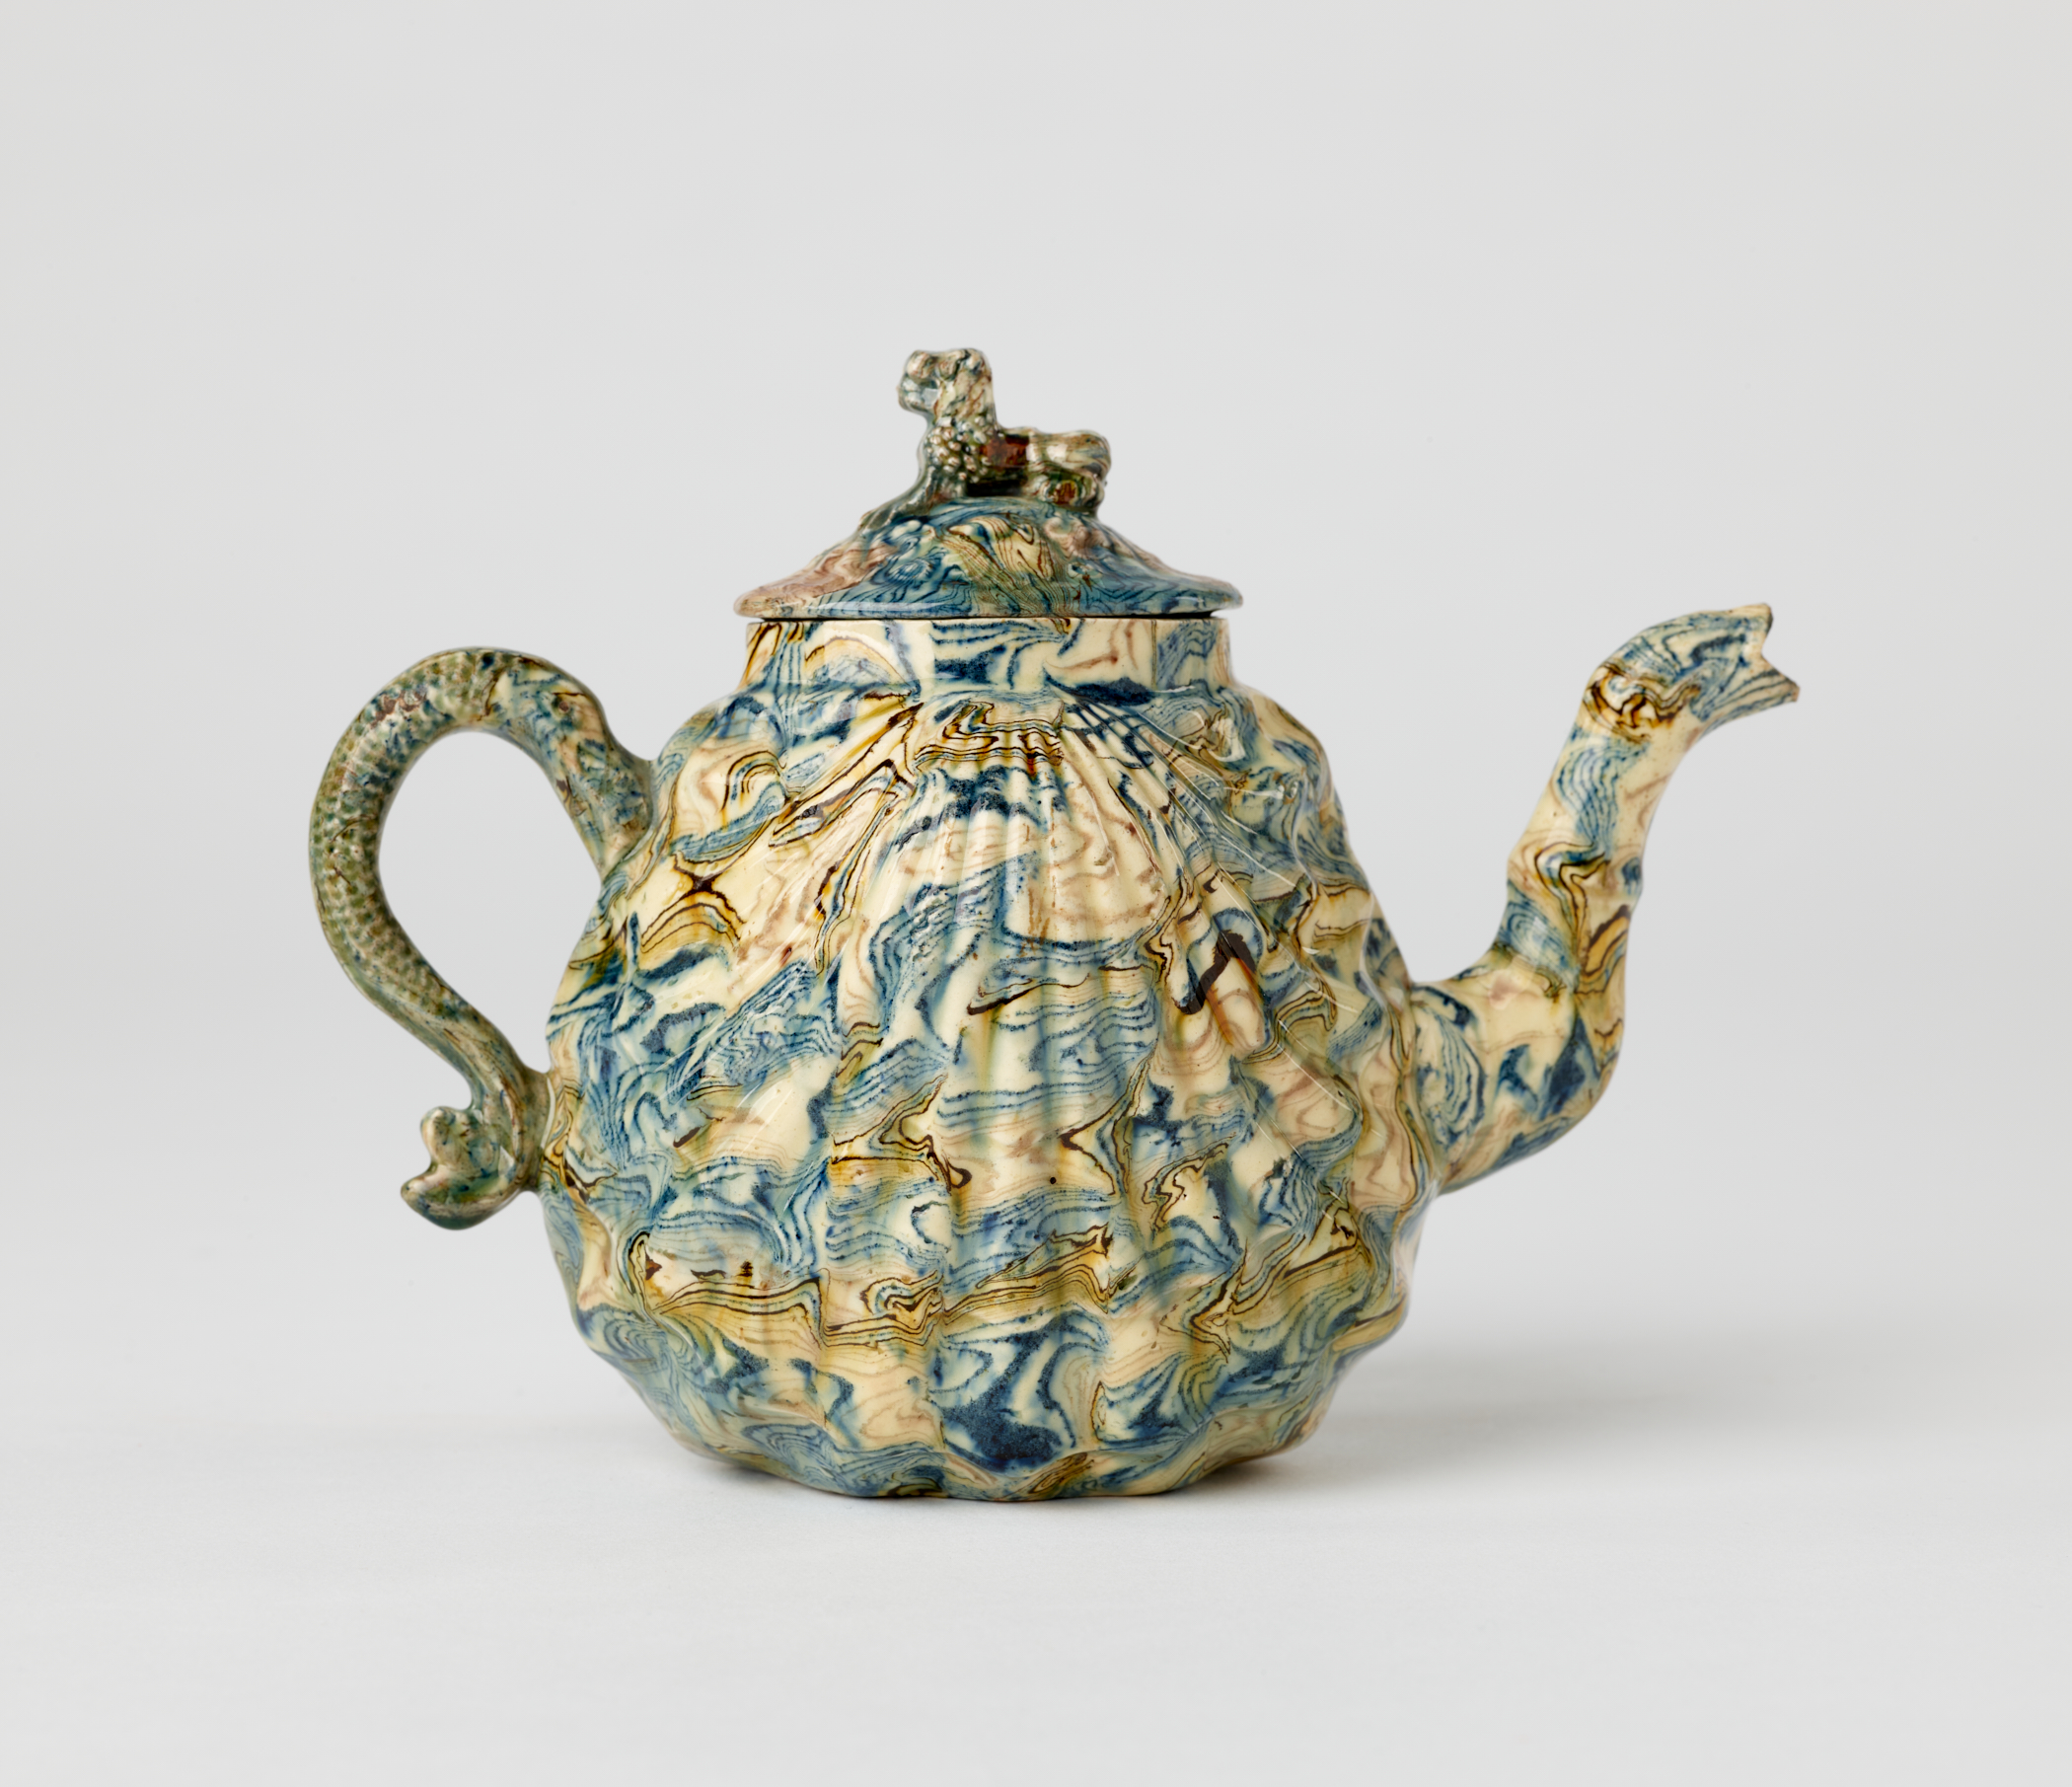 /A%20sculptural%20agateware%20teapot%2C%20with%20a%20sculptural%20fin%20handle%2C%20shell%20shaped%20body%2C%20decorative%20spout%2C%20and%20animal%20sculpted%20finial%20for%20the%20lid.%20It%20is%20blue%2C%20brown%2C%20and%20cream%20in%20color.